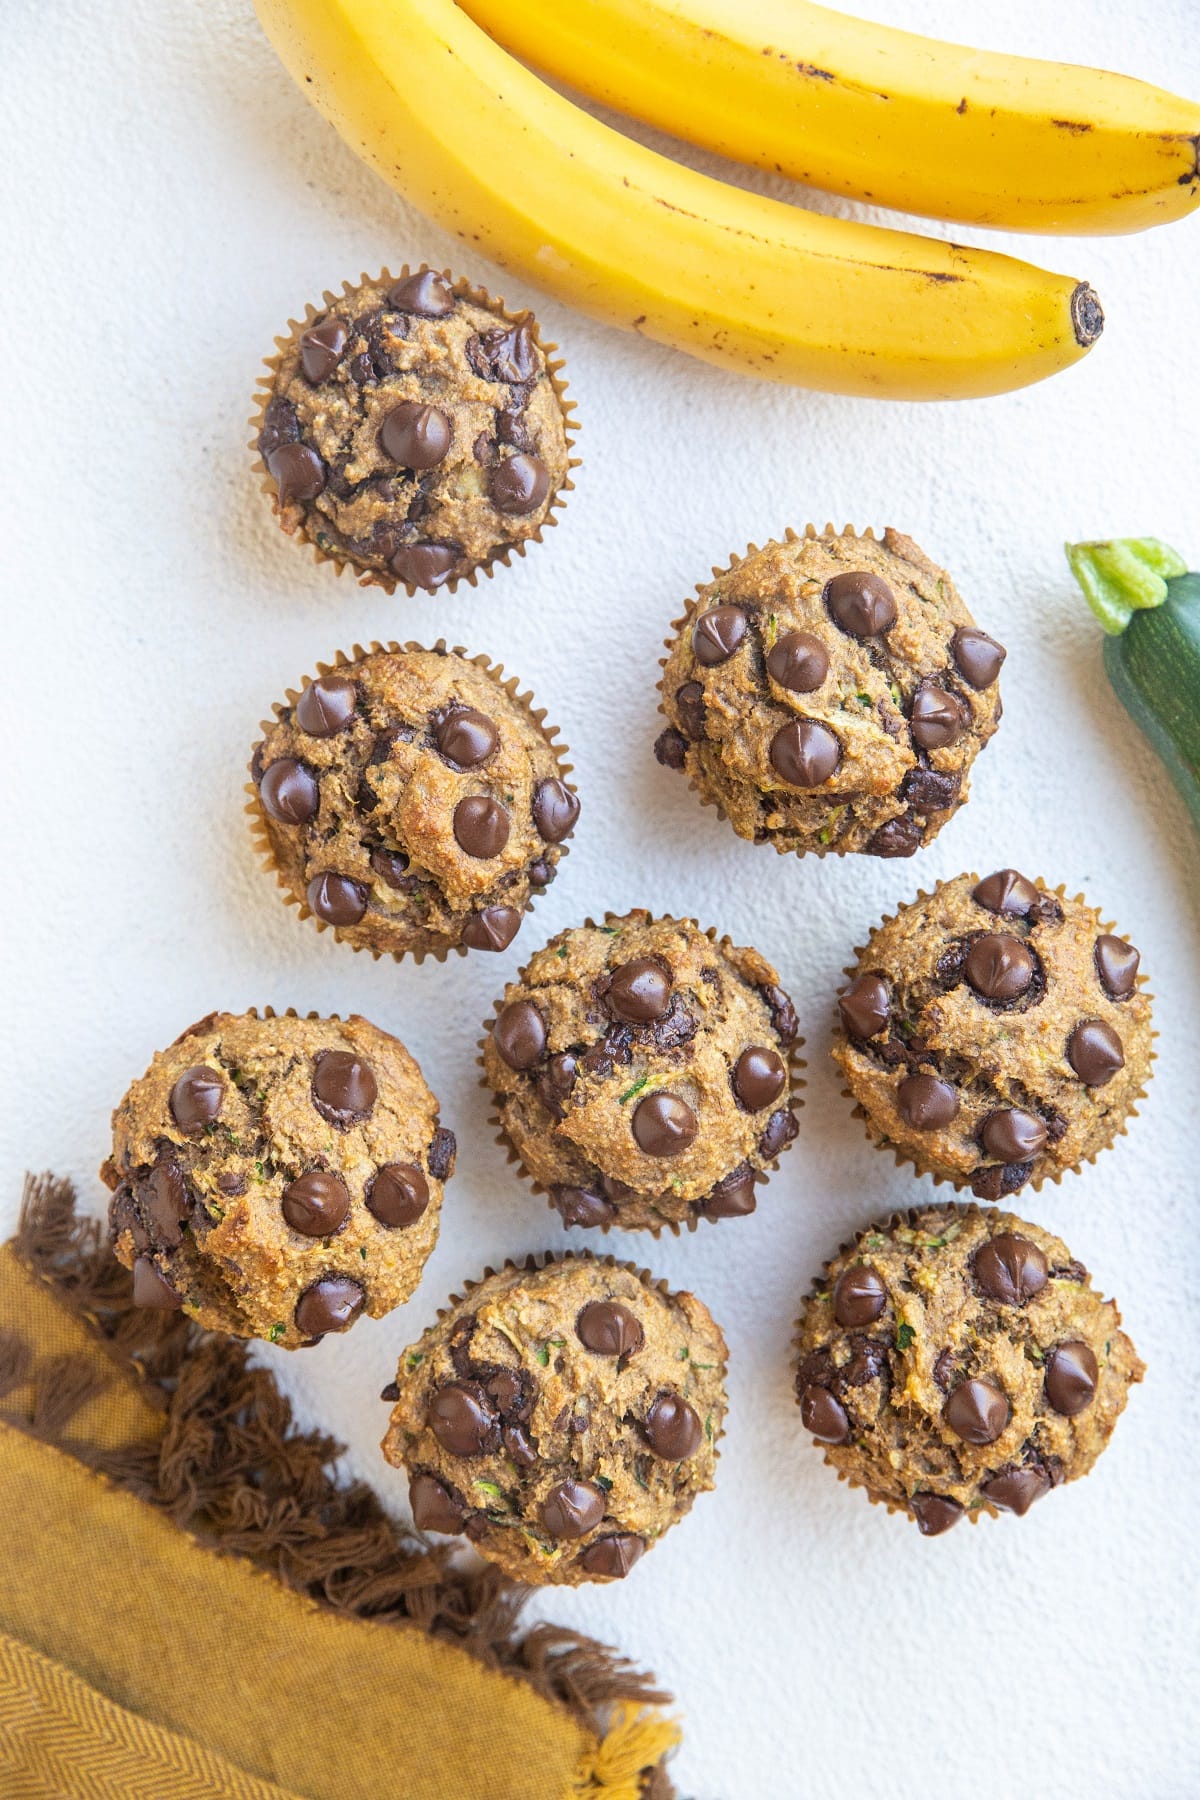 Top down photo of a whole batch of banana zucchini muffins on a white backdrop with bananas and a zucchini squash to the side, along with a golden napkin.